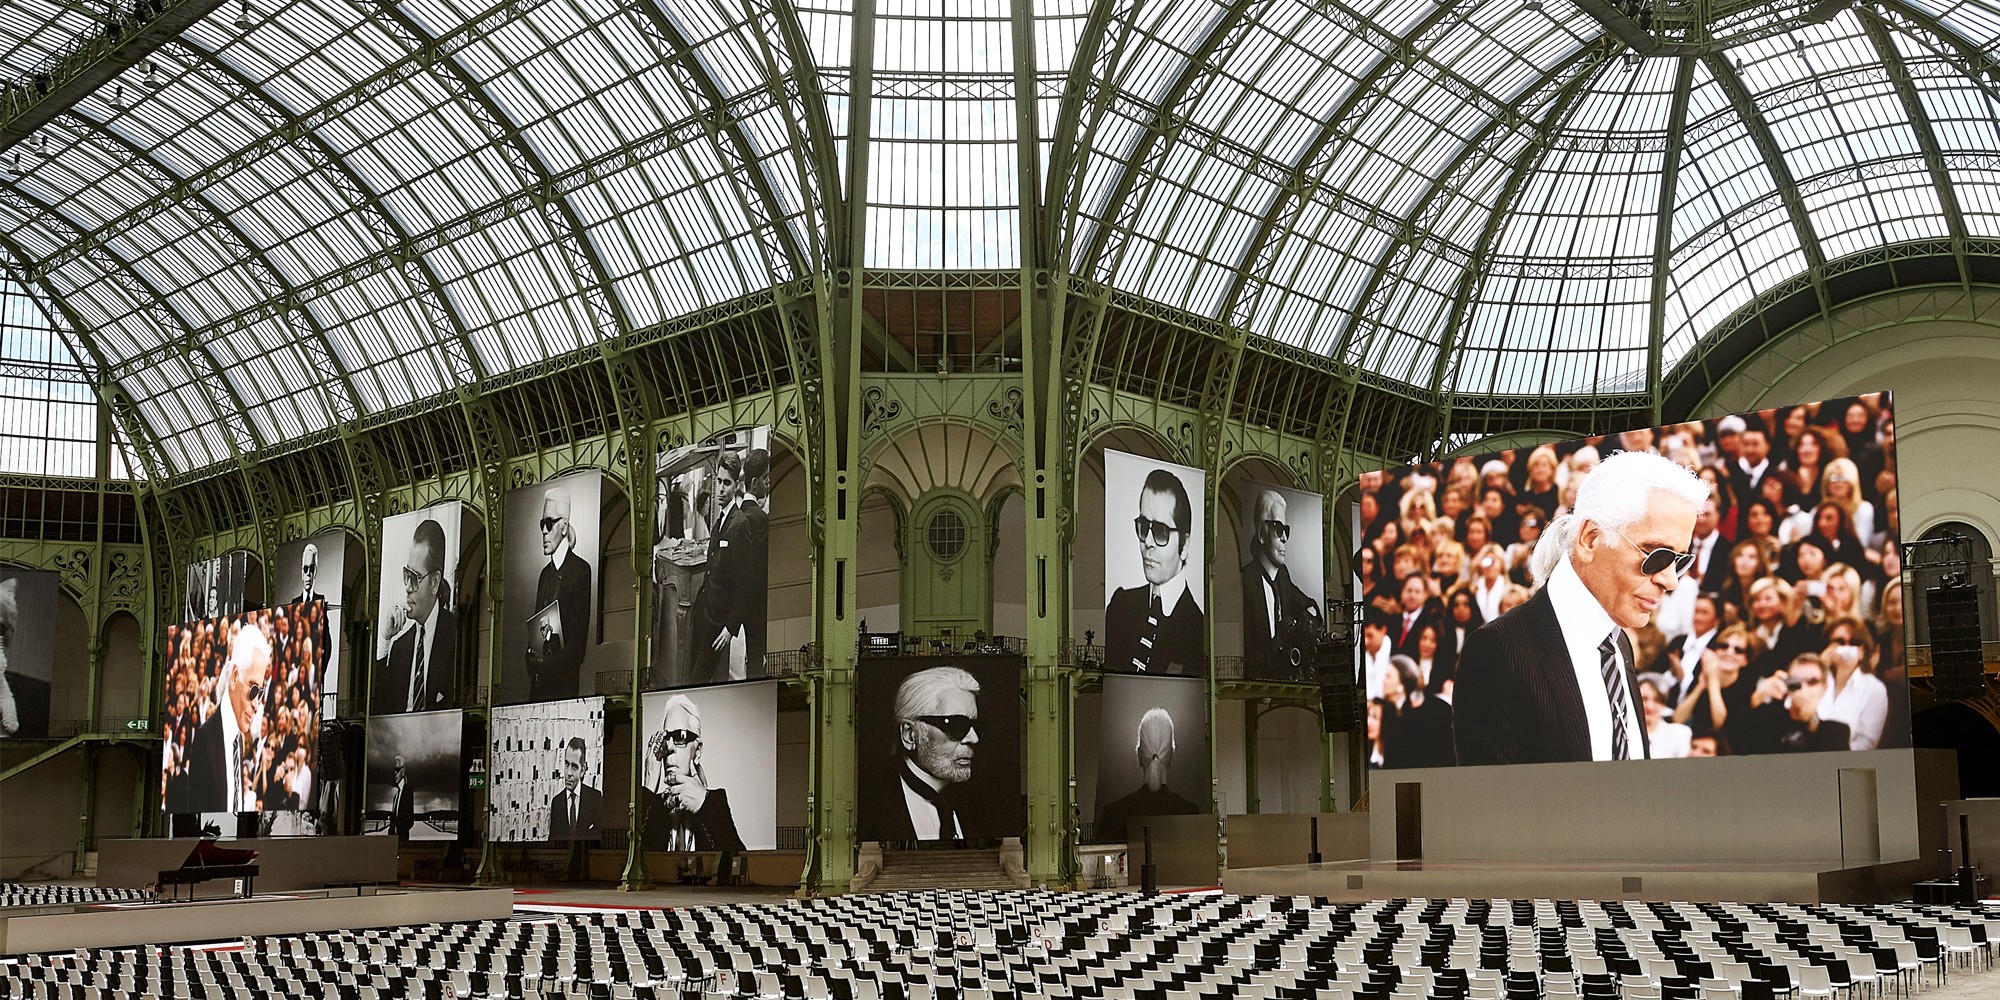 KARL LAGERFELD ‘KARL FOR EVER’ MEMORIAL CELEBRATION AT THE GRAND PALAIS